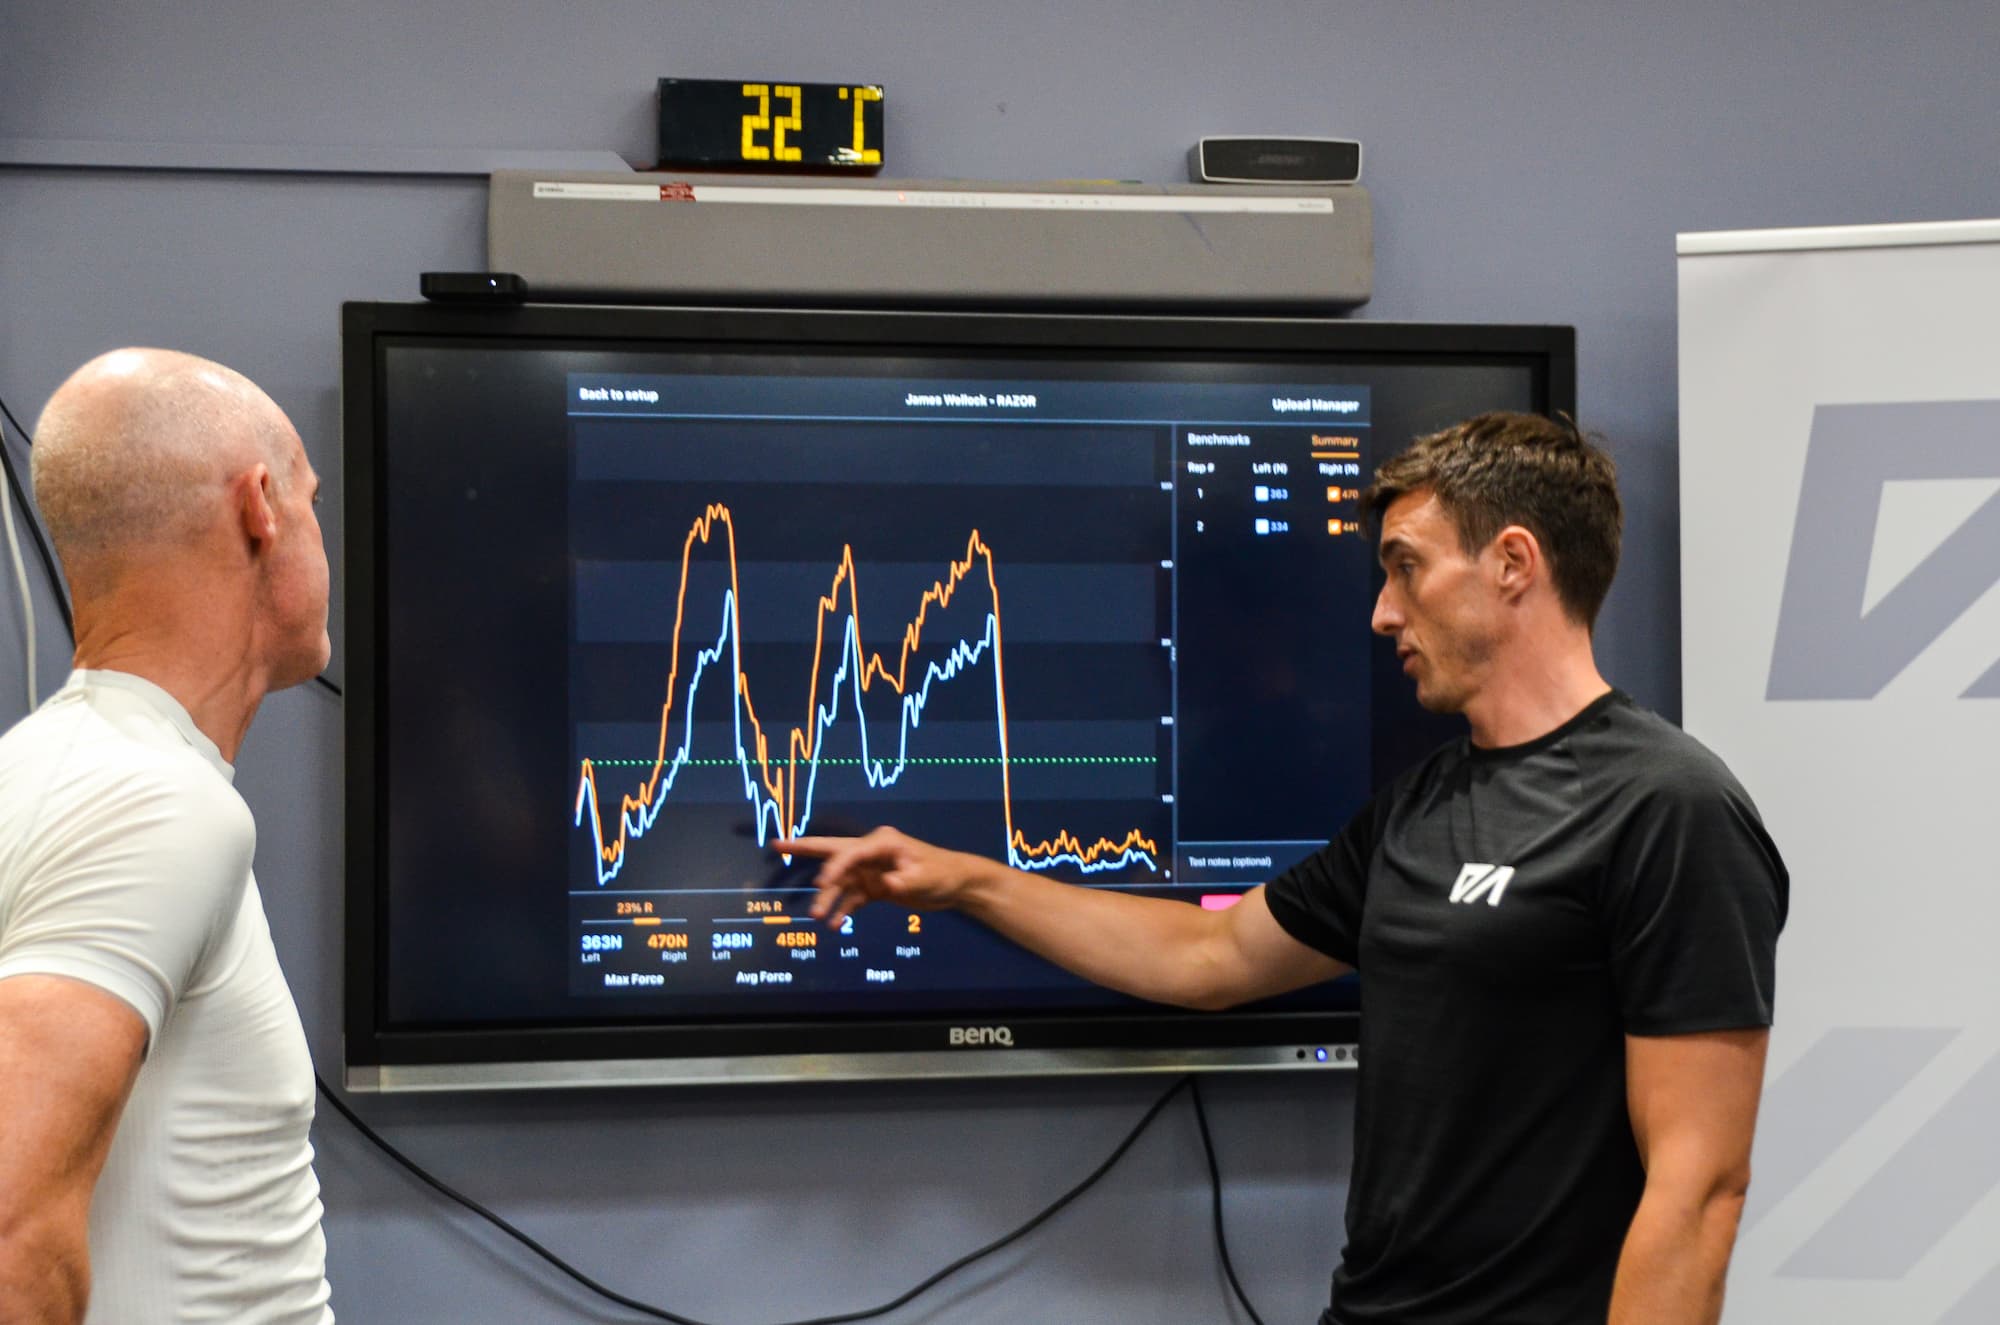 Strength and conditioning coach, Eddy, discusses performance statistics.